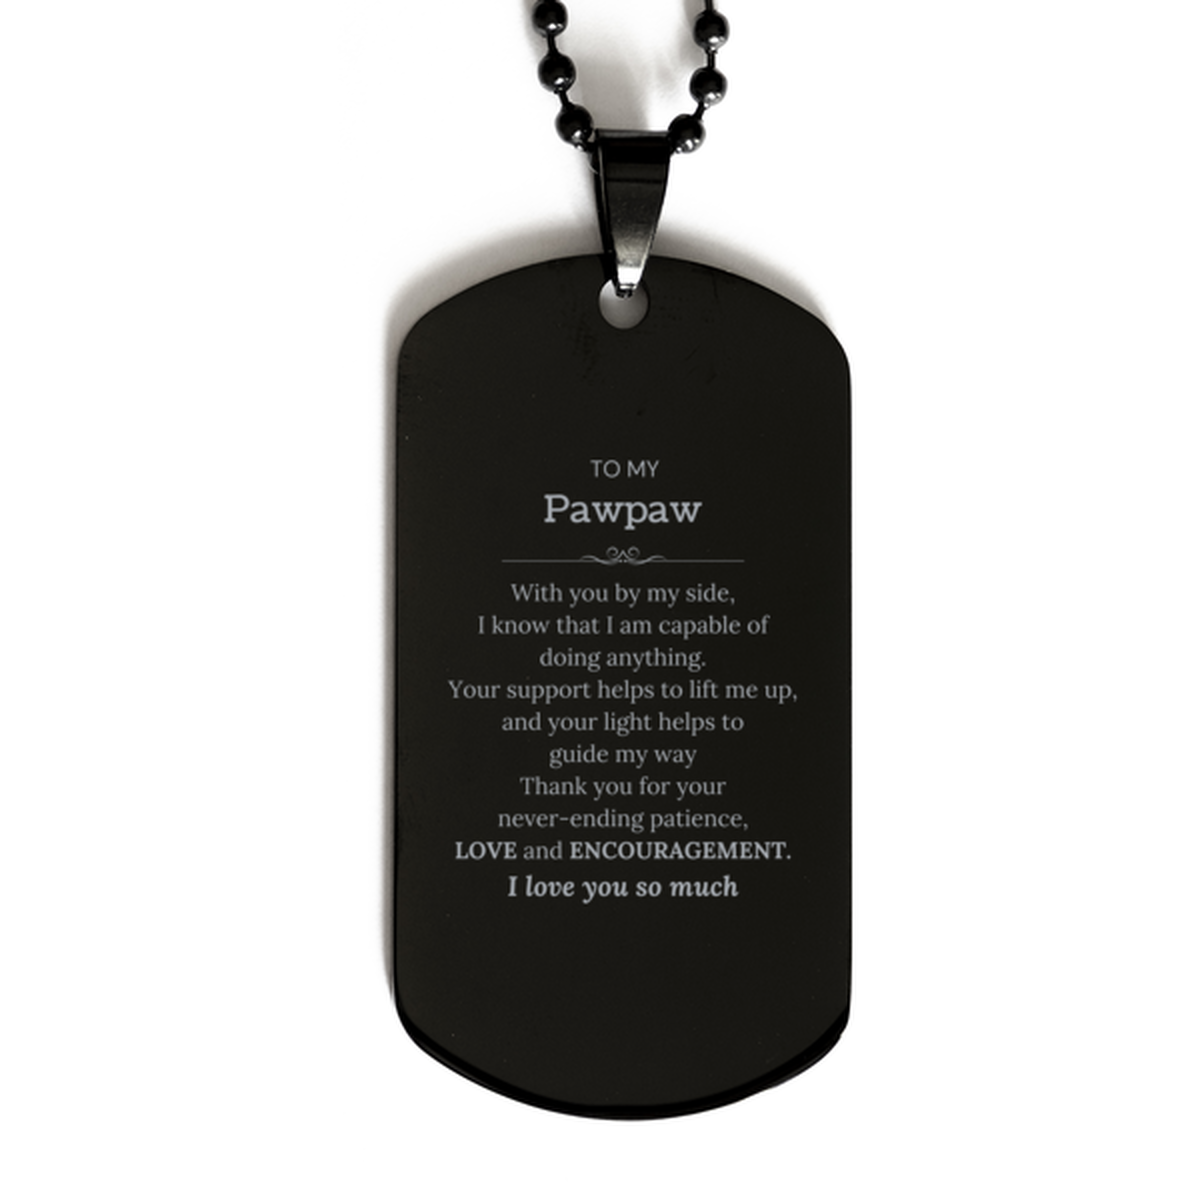 Appreciation Pawpaw Black Dog Tag Gifts, To My Pawpaw Birthday Christmas Wedding Keepsake Gifts for Pawpaw With you by my side, I know that I am capable of doing anything. I love you so much